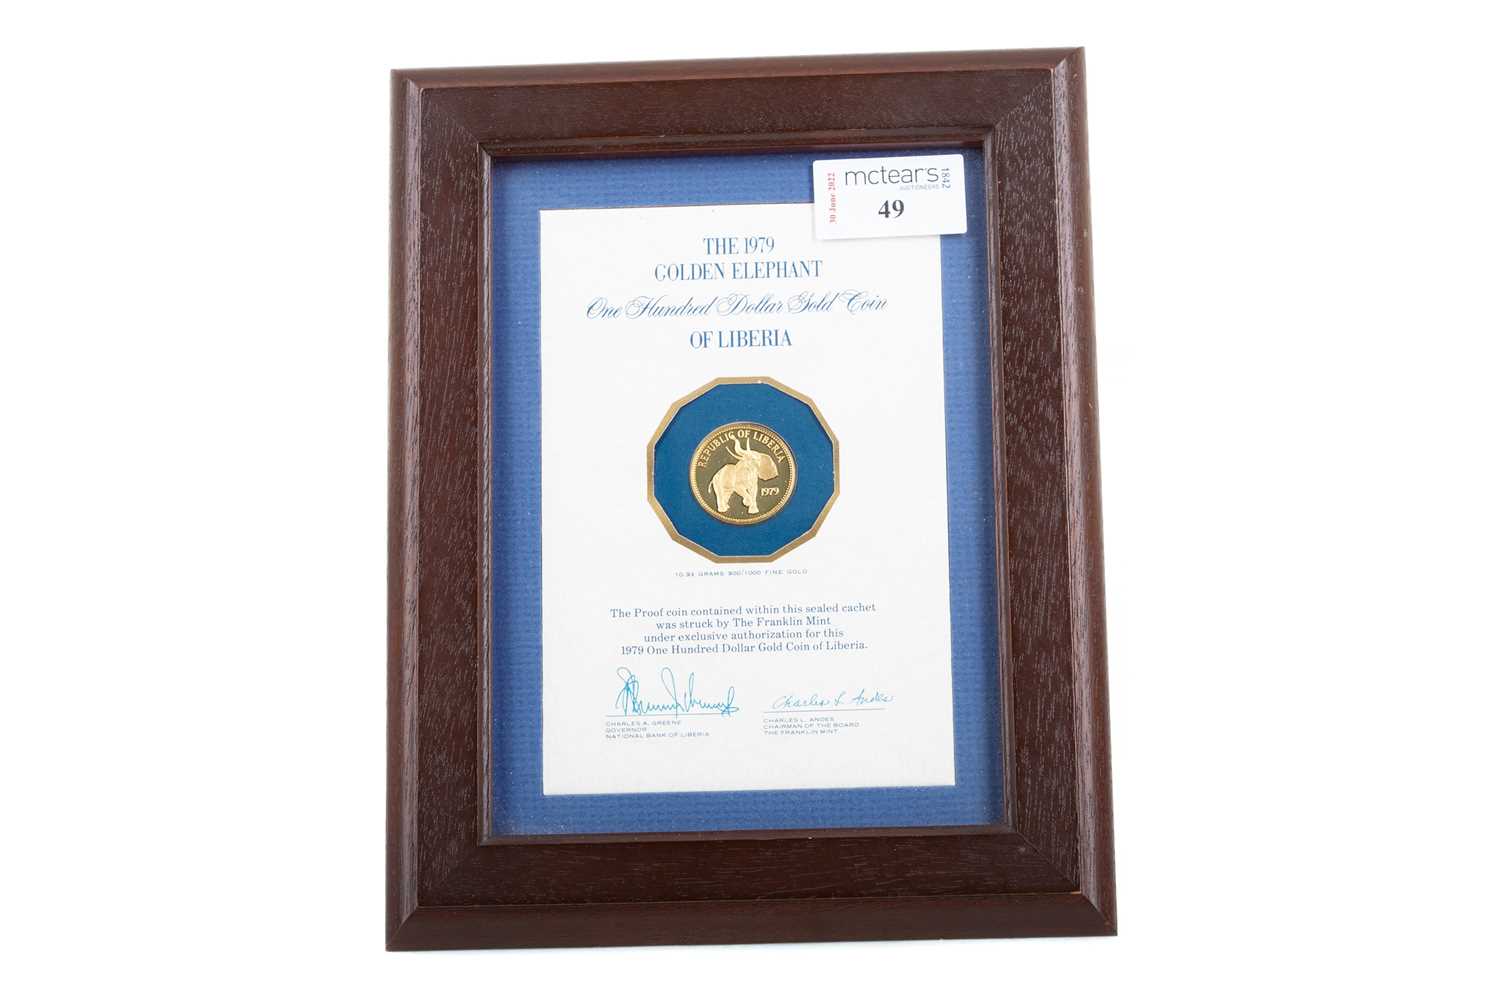 Lot 49 - THE 1979 GOLDEN ELEPHANT ONE HUNDRED DOLLAR COIN OF LIBERIA